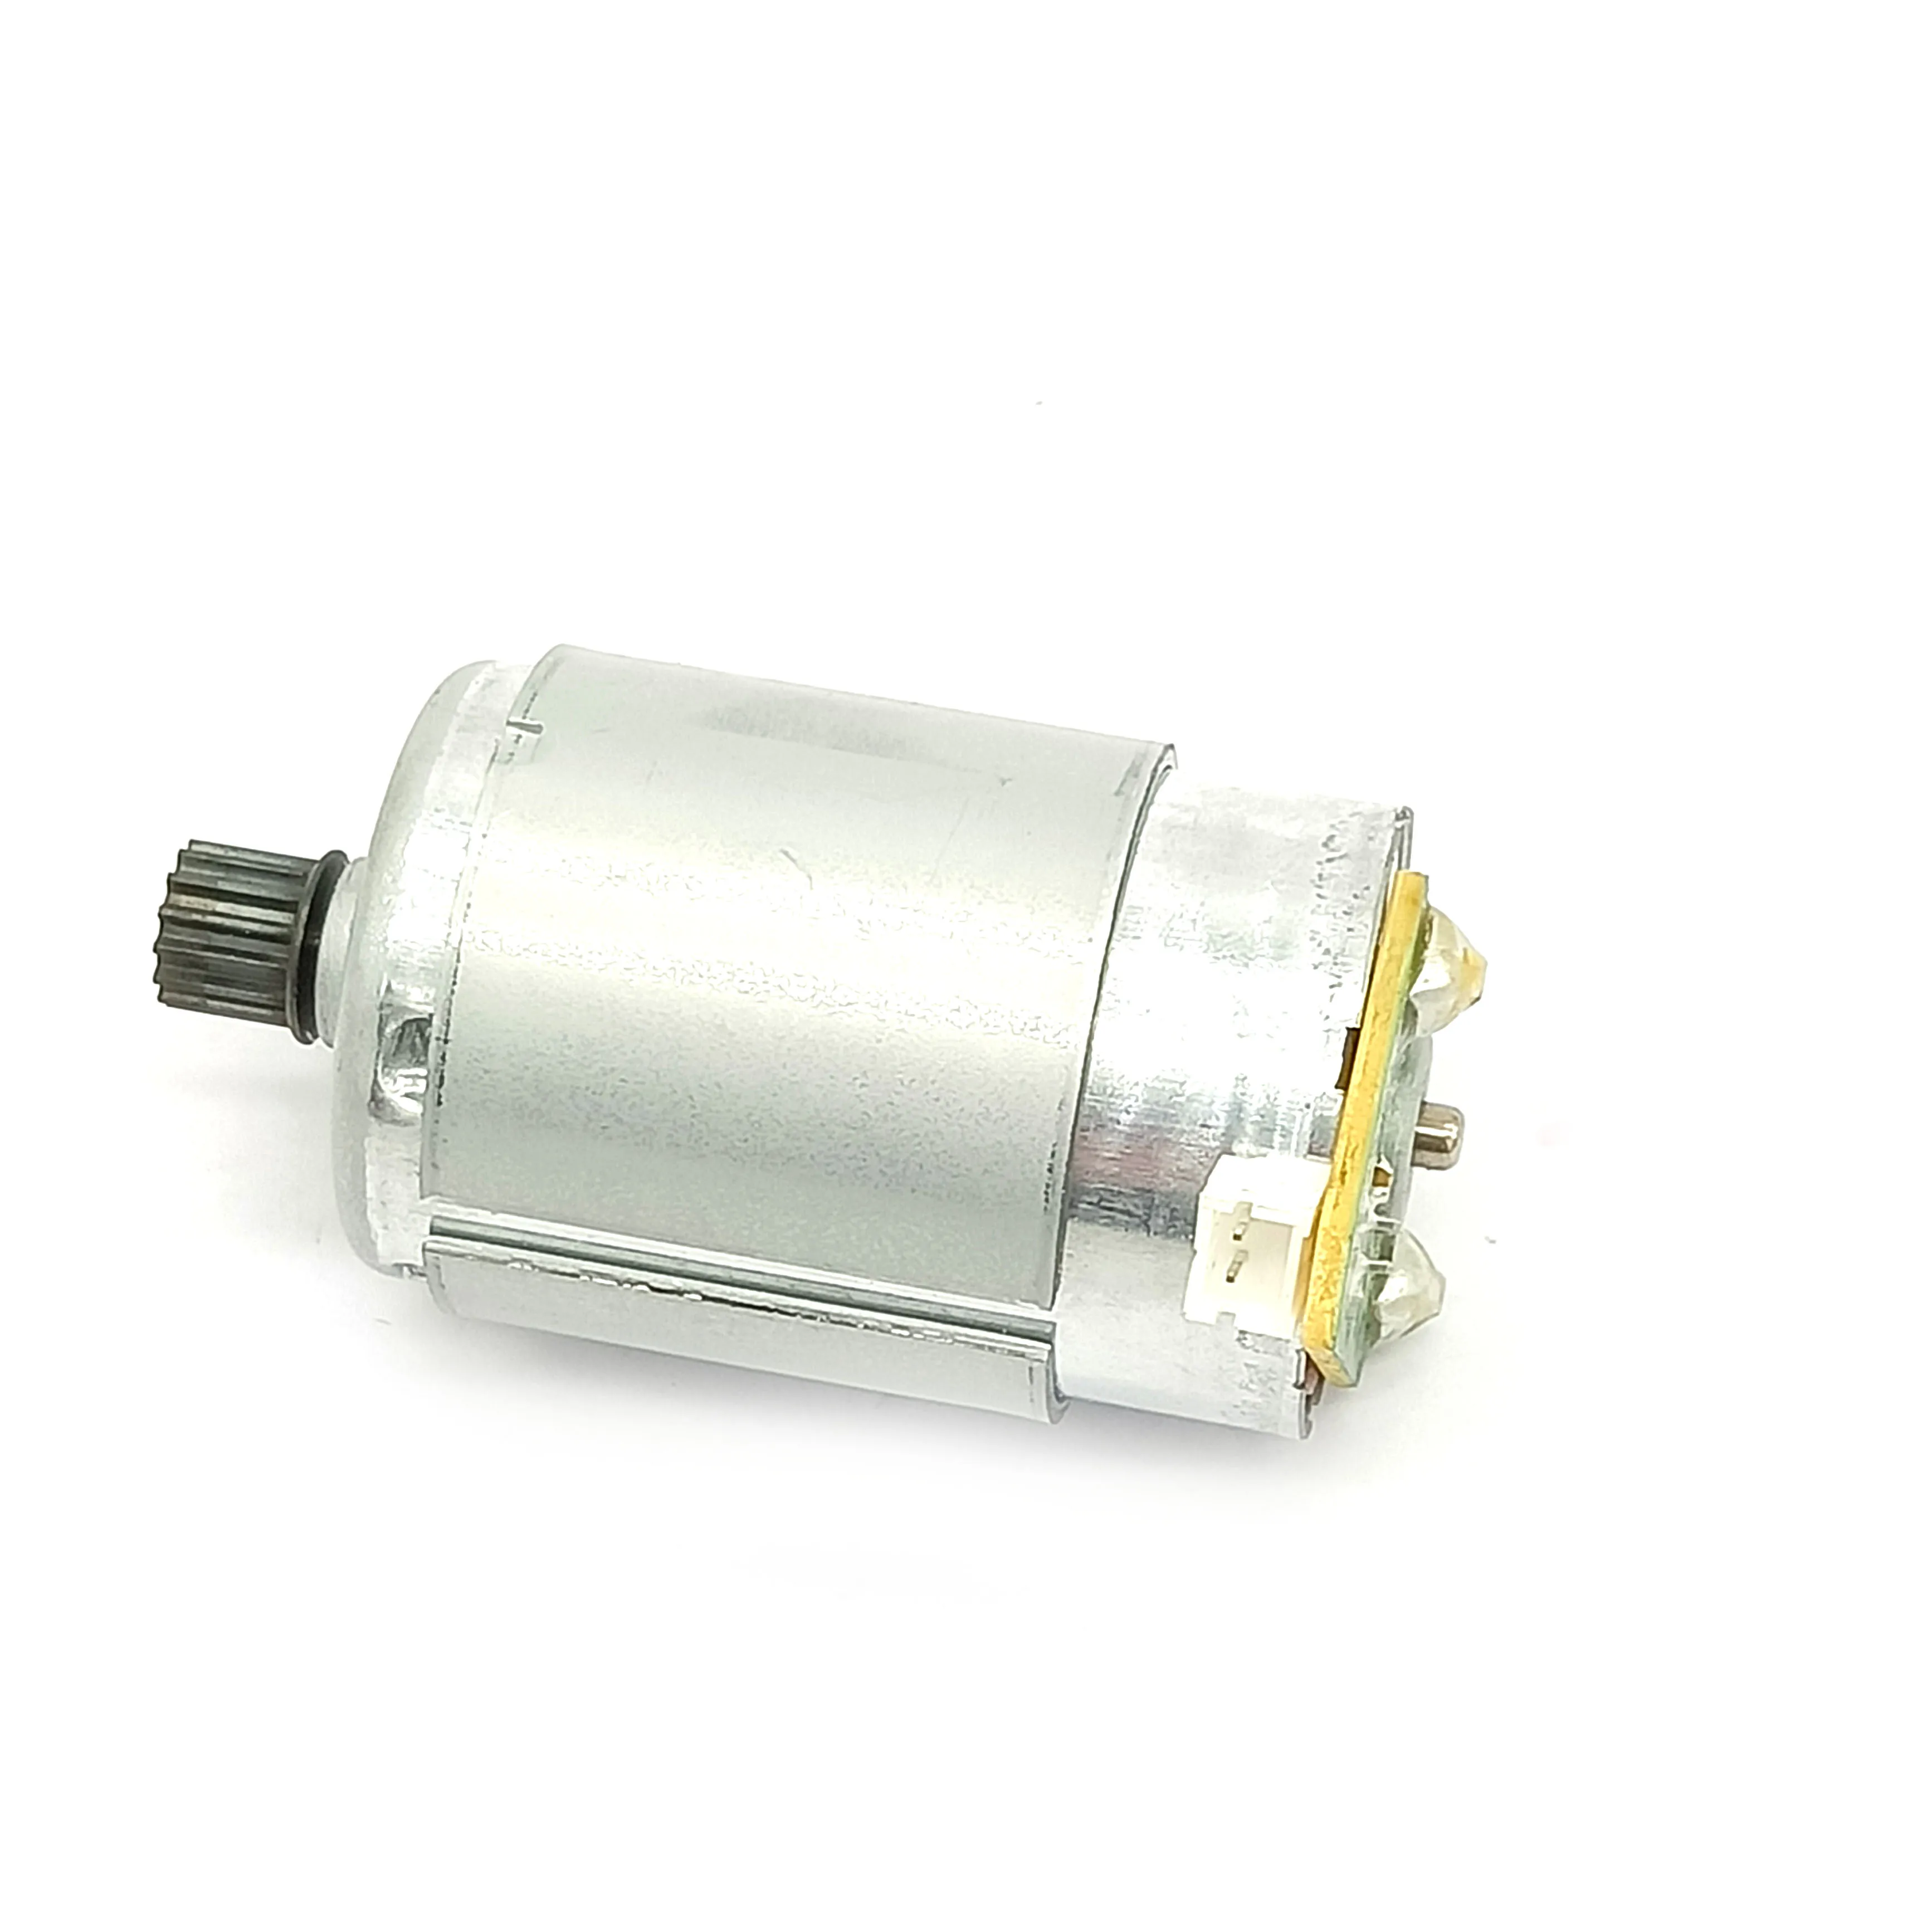 

Strip Motor MFC-J2330DW RS445-ST/18140/DW Fits For Brother T4500DW J3930DW J2730DW J6730DW J3530DW T4000DW J2330DW J6945DW